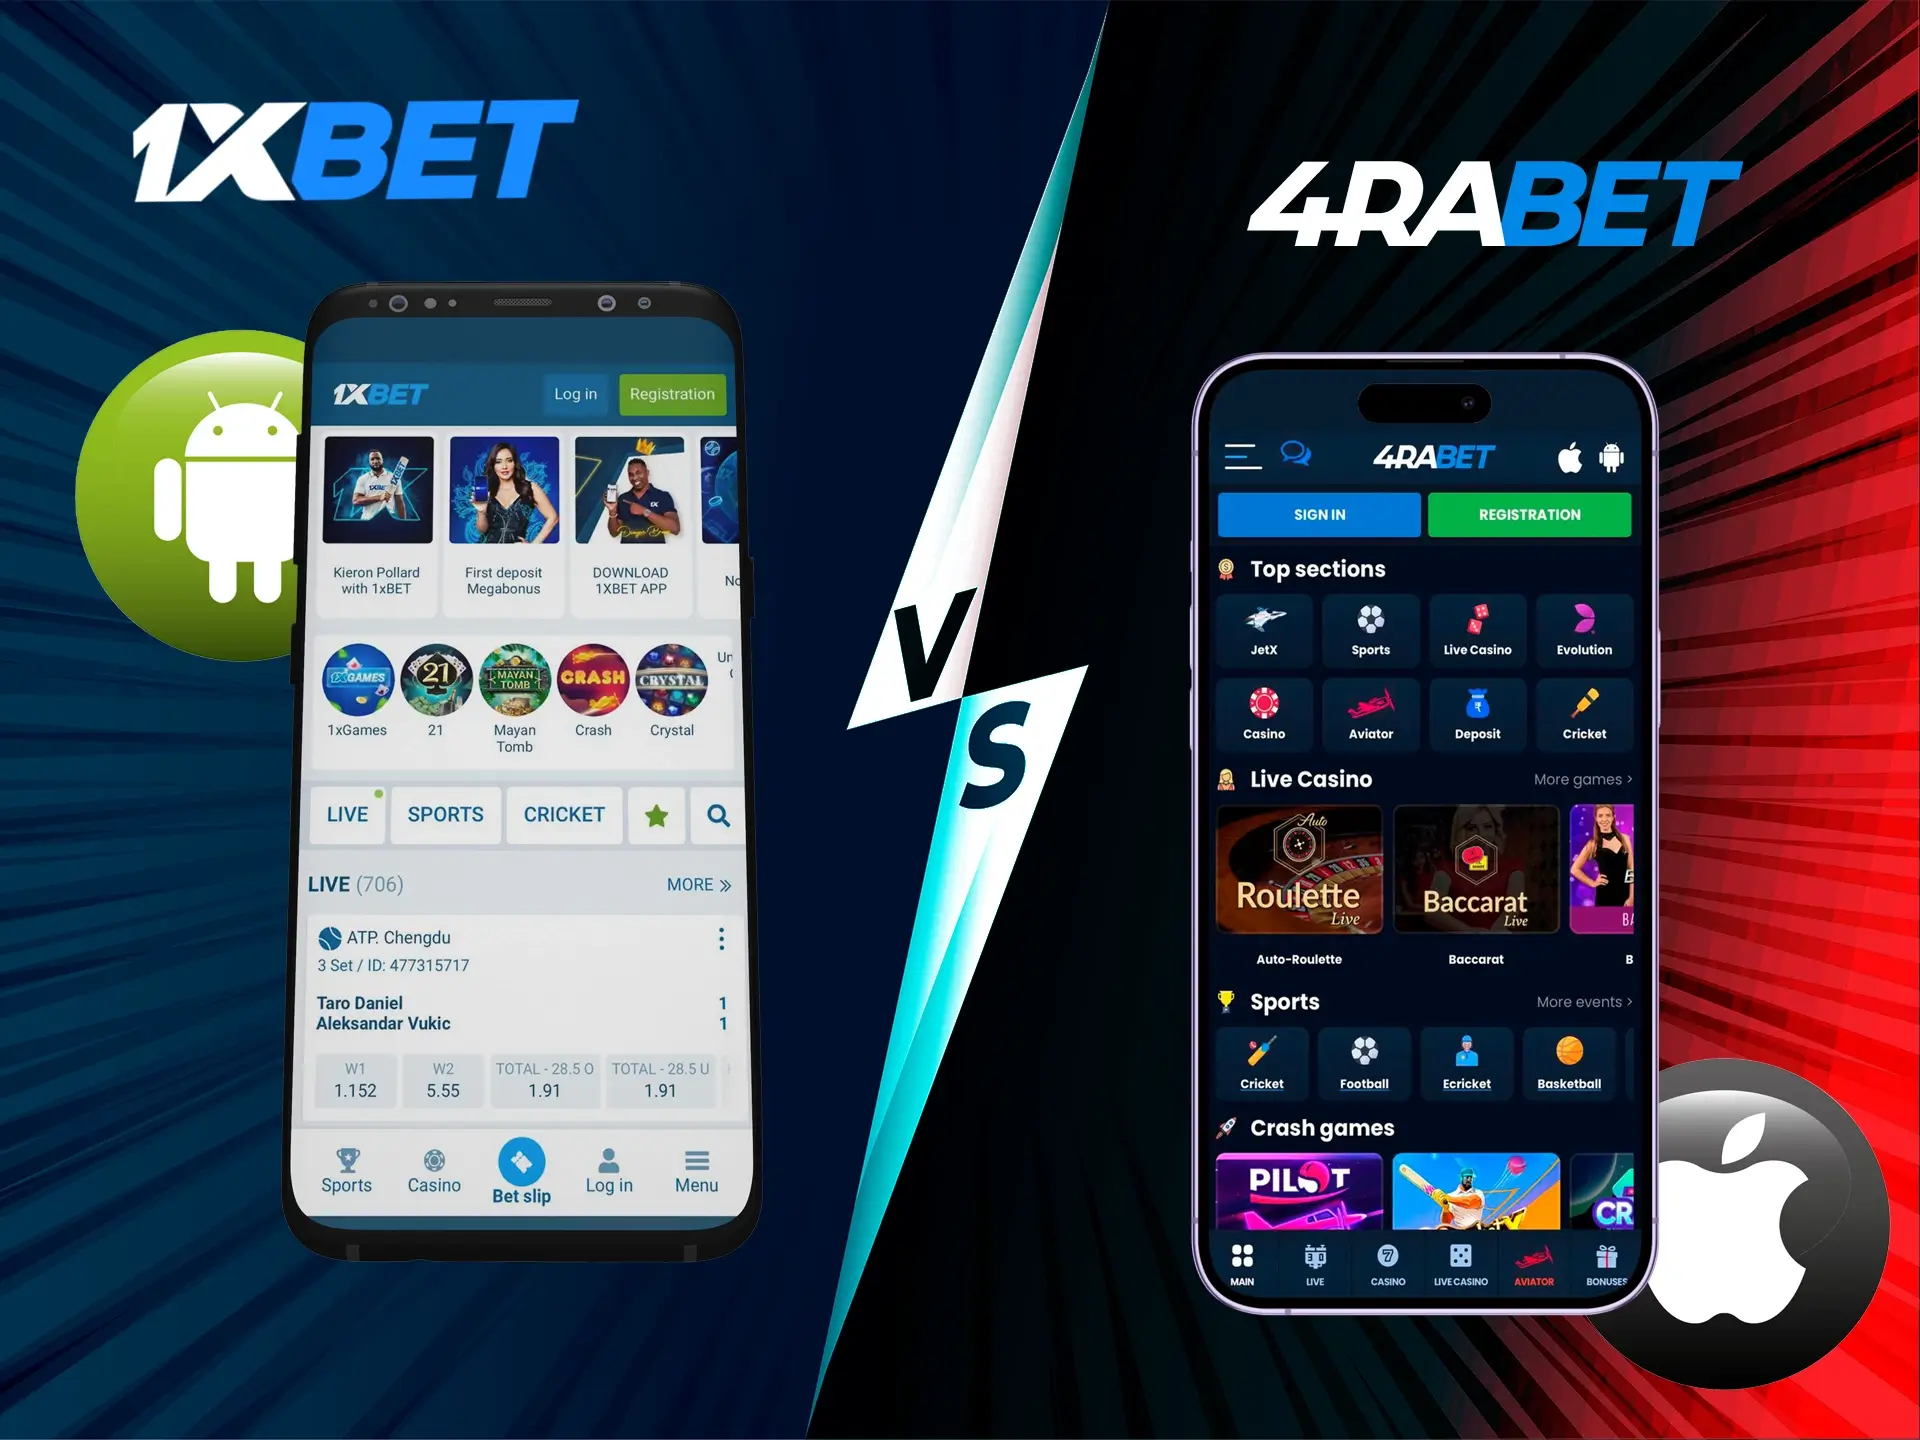 Find out which app is right for you, from 1xbet or 4rabet.